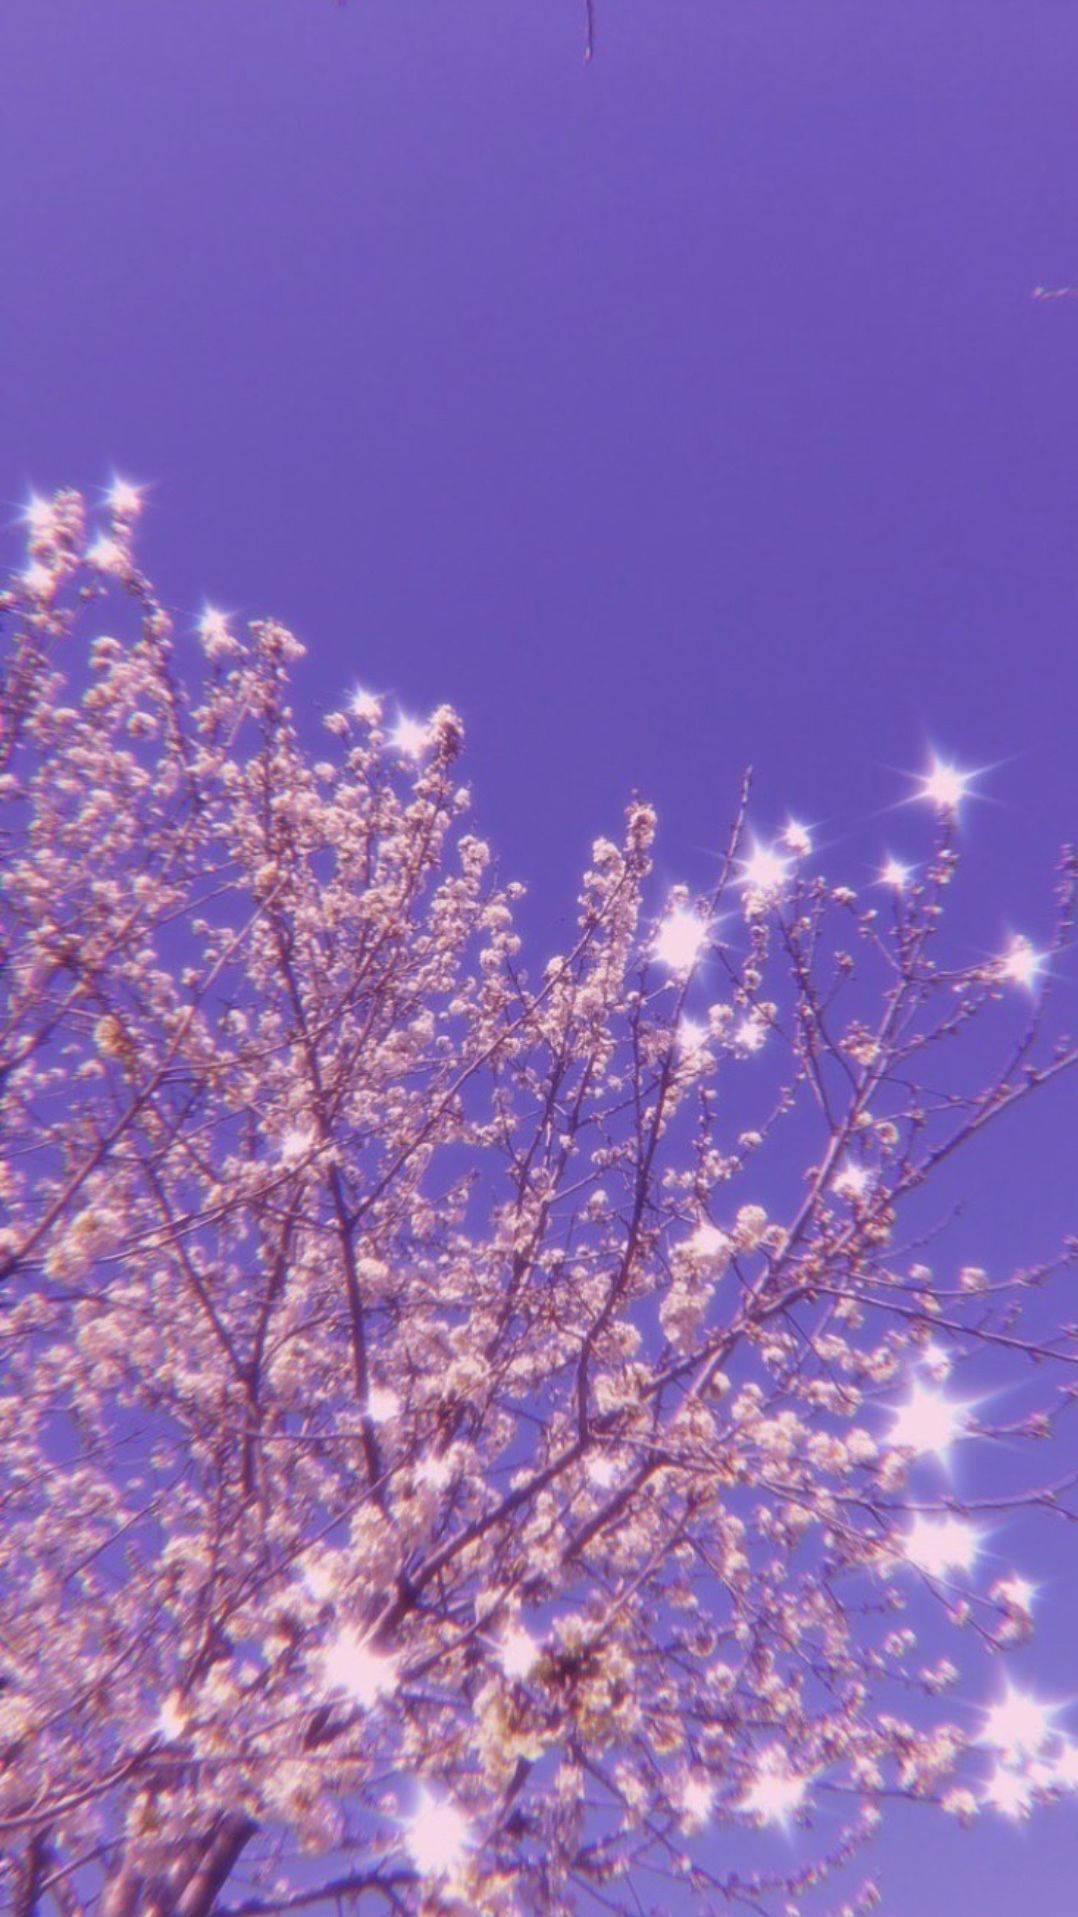 Sparkly Cherry Blossoms With Light Purple Sky